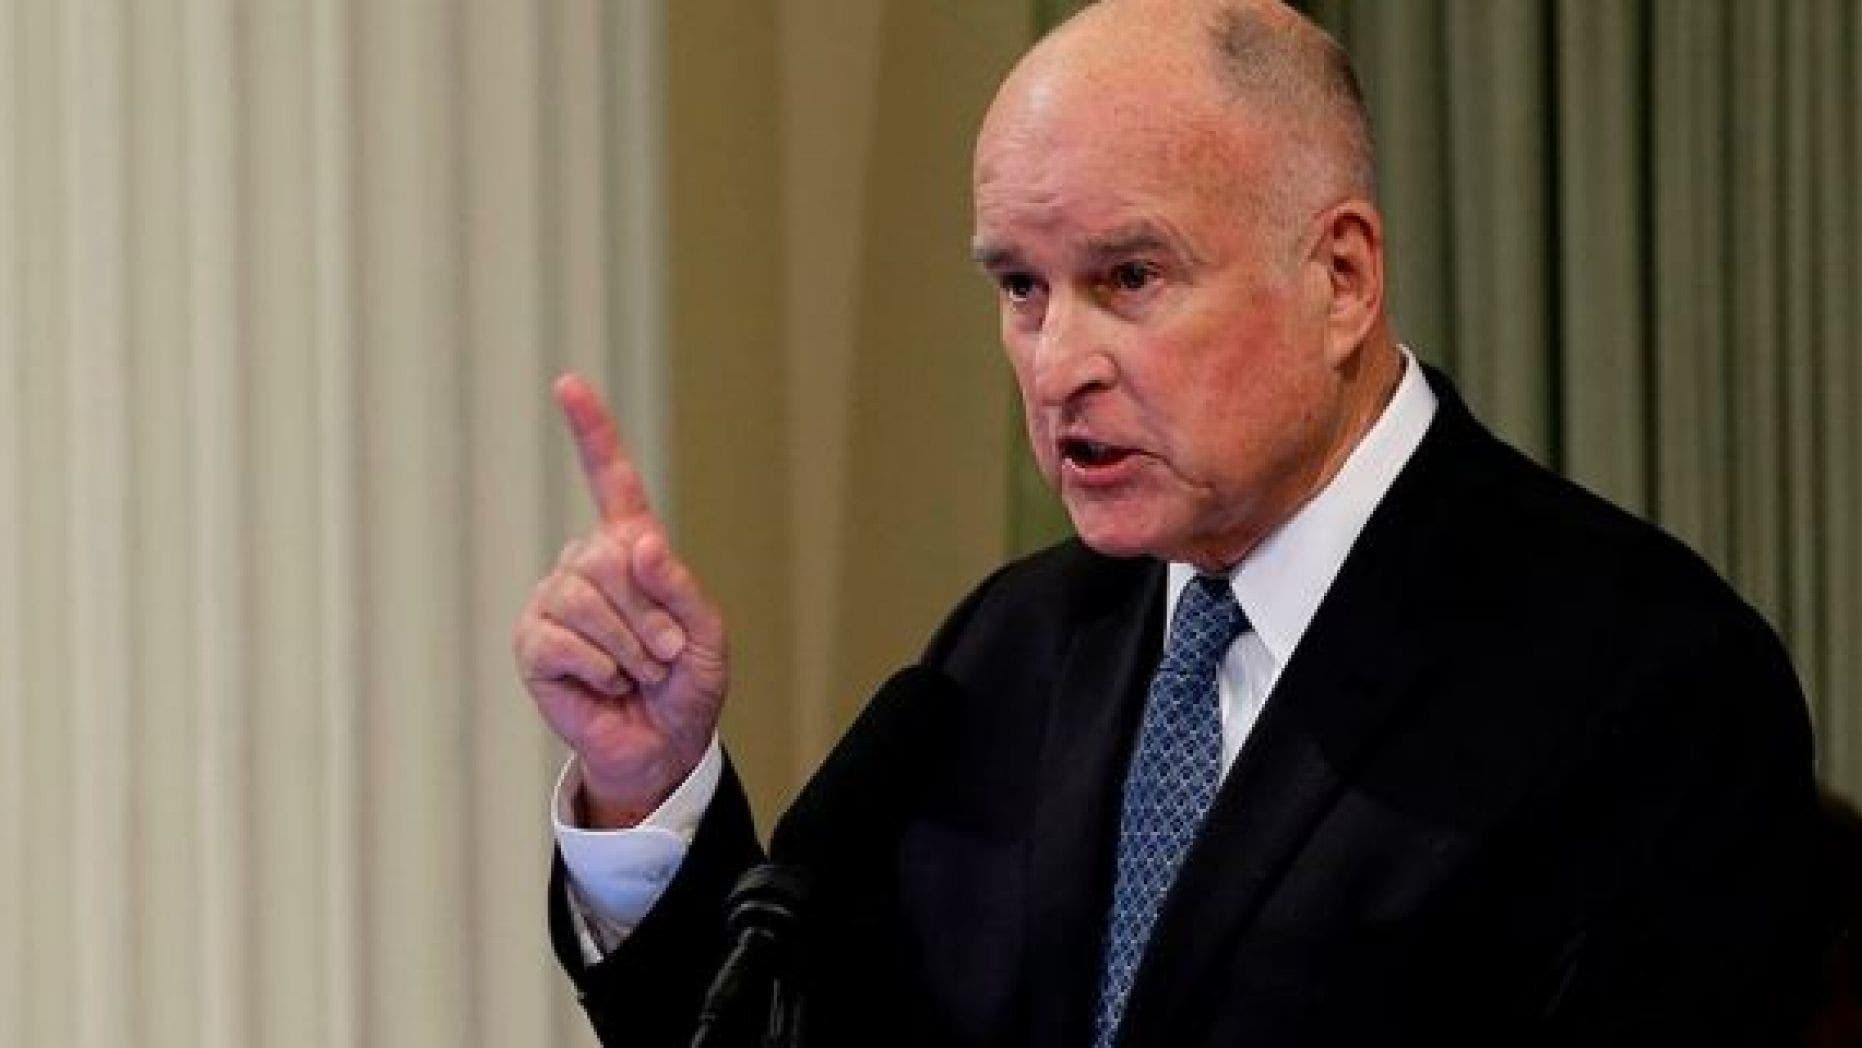 How close to doomsday? Just ask former California Gov. Jerry Brown